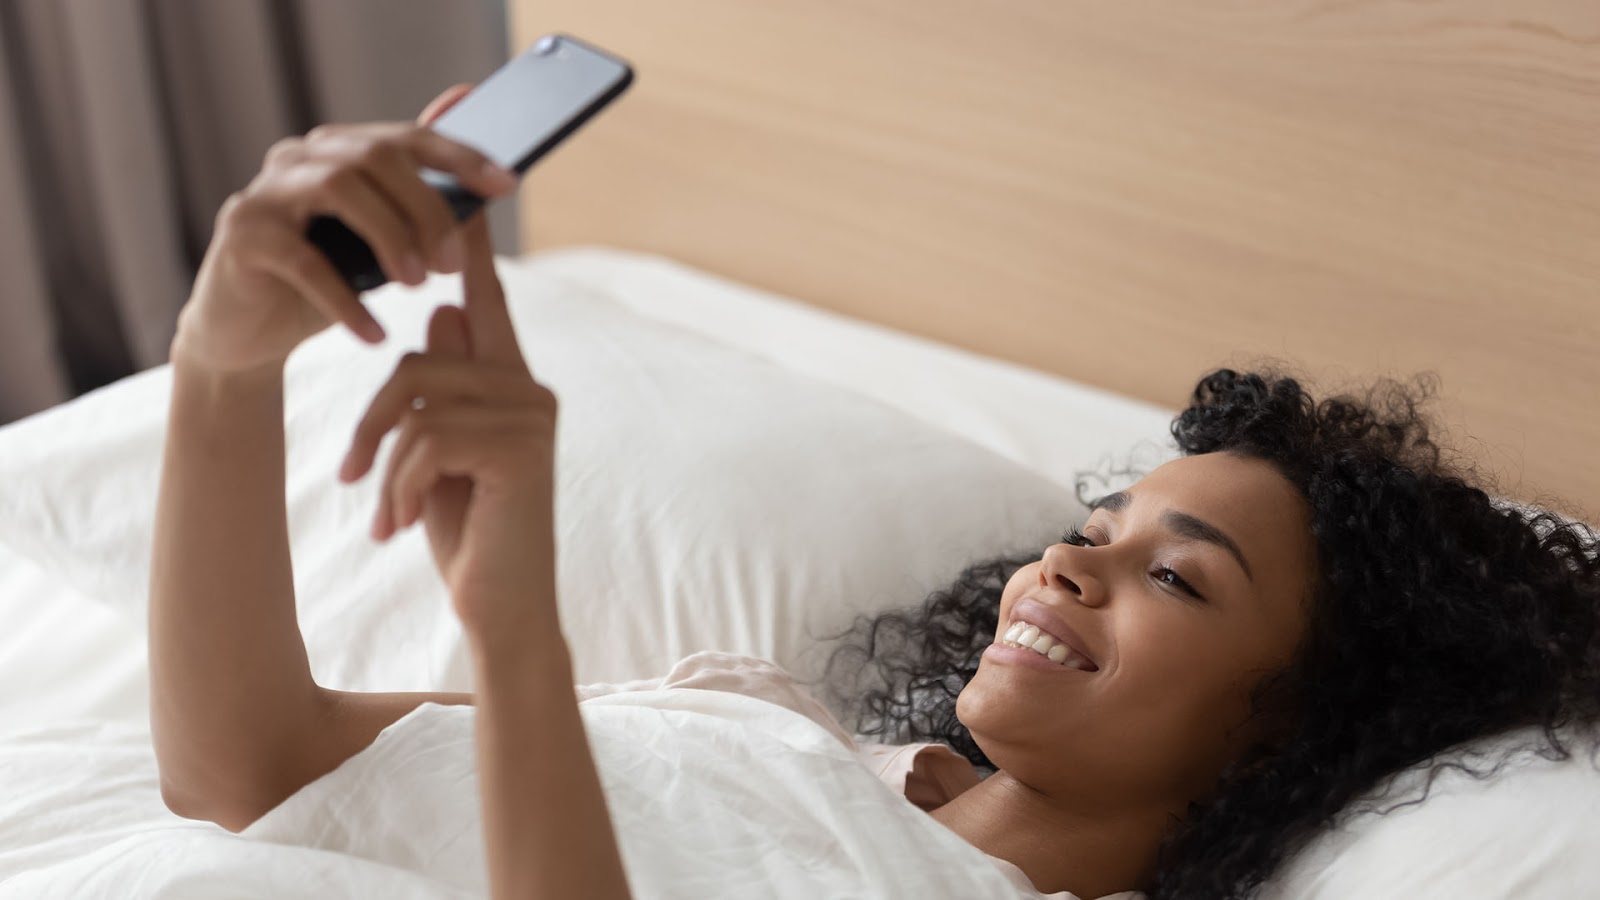 Brunette woman with curly hair lying in bed of white sheets, and smiling while looking at her phone